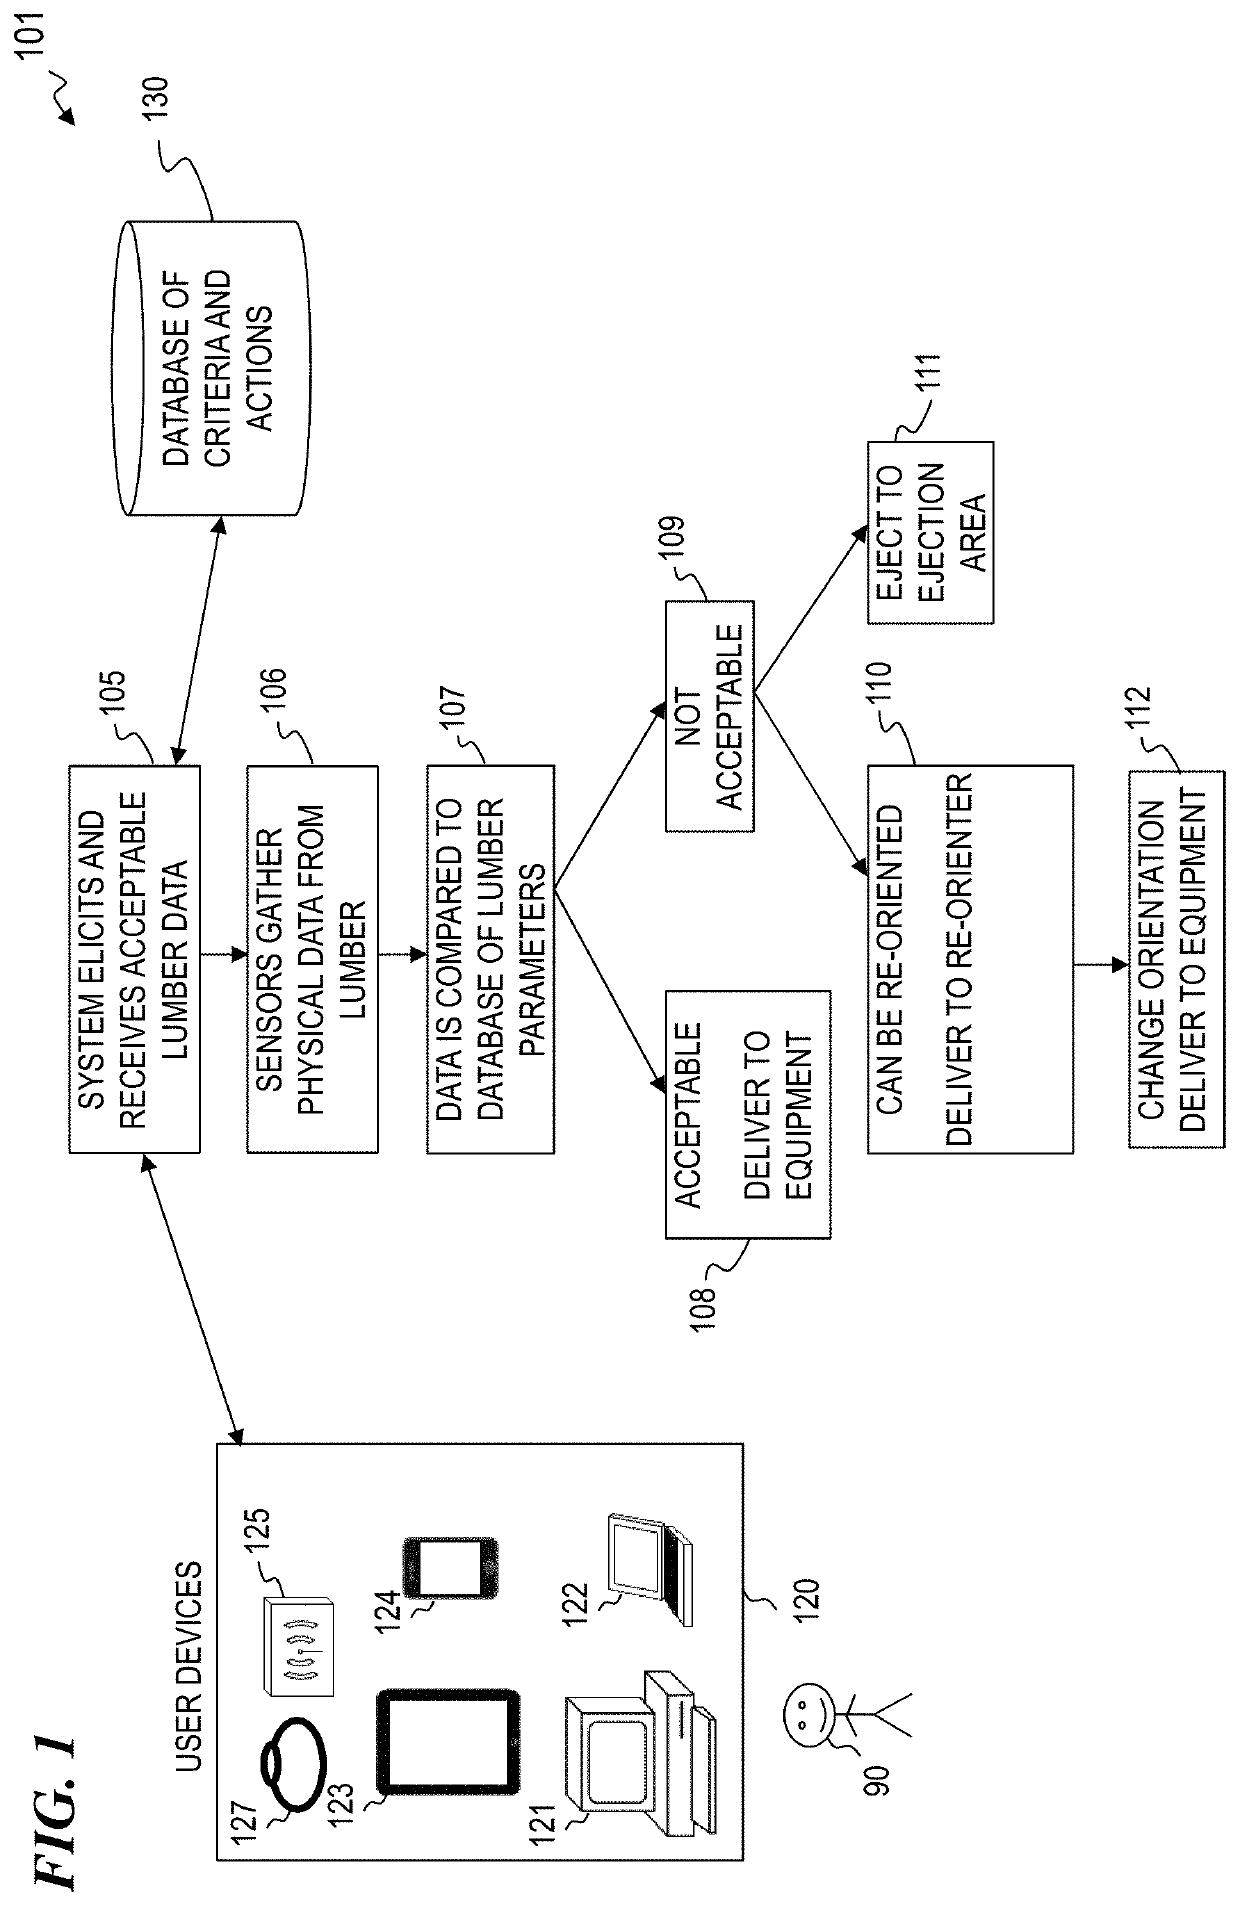 Automated system and method for lumber analysis